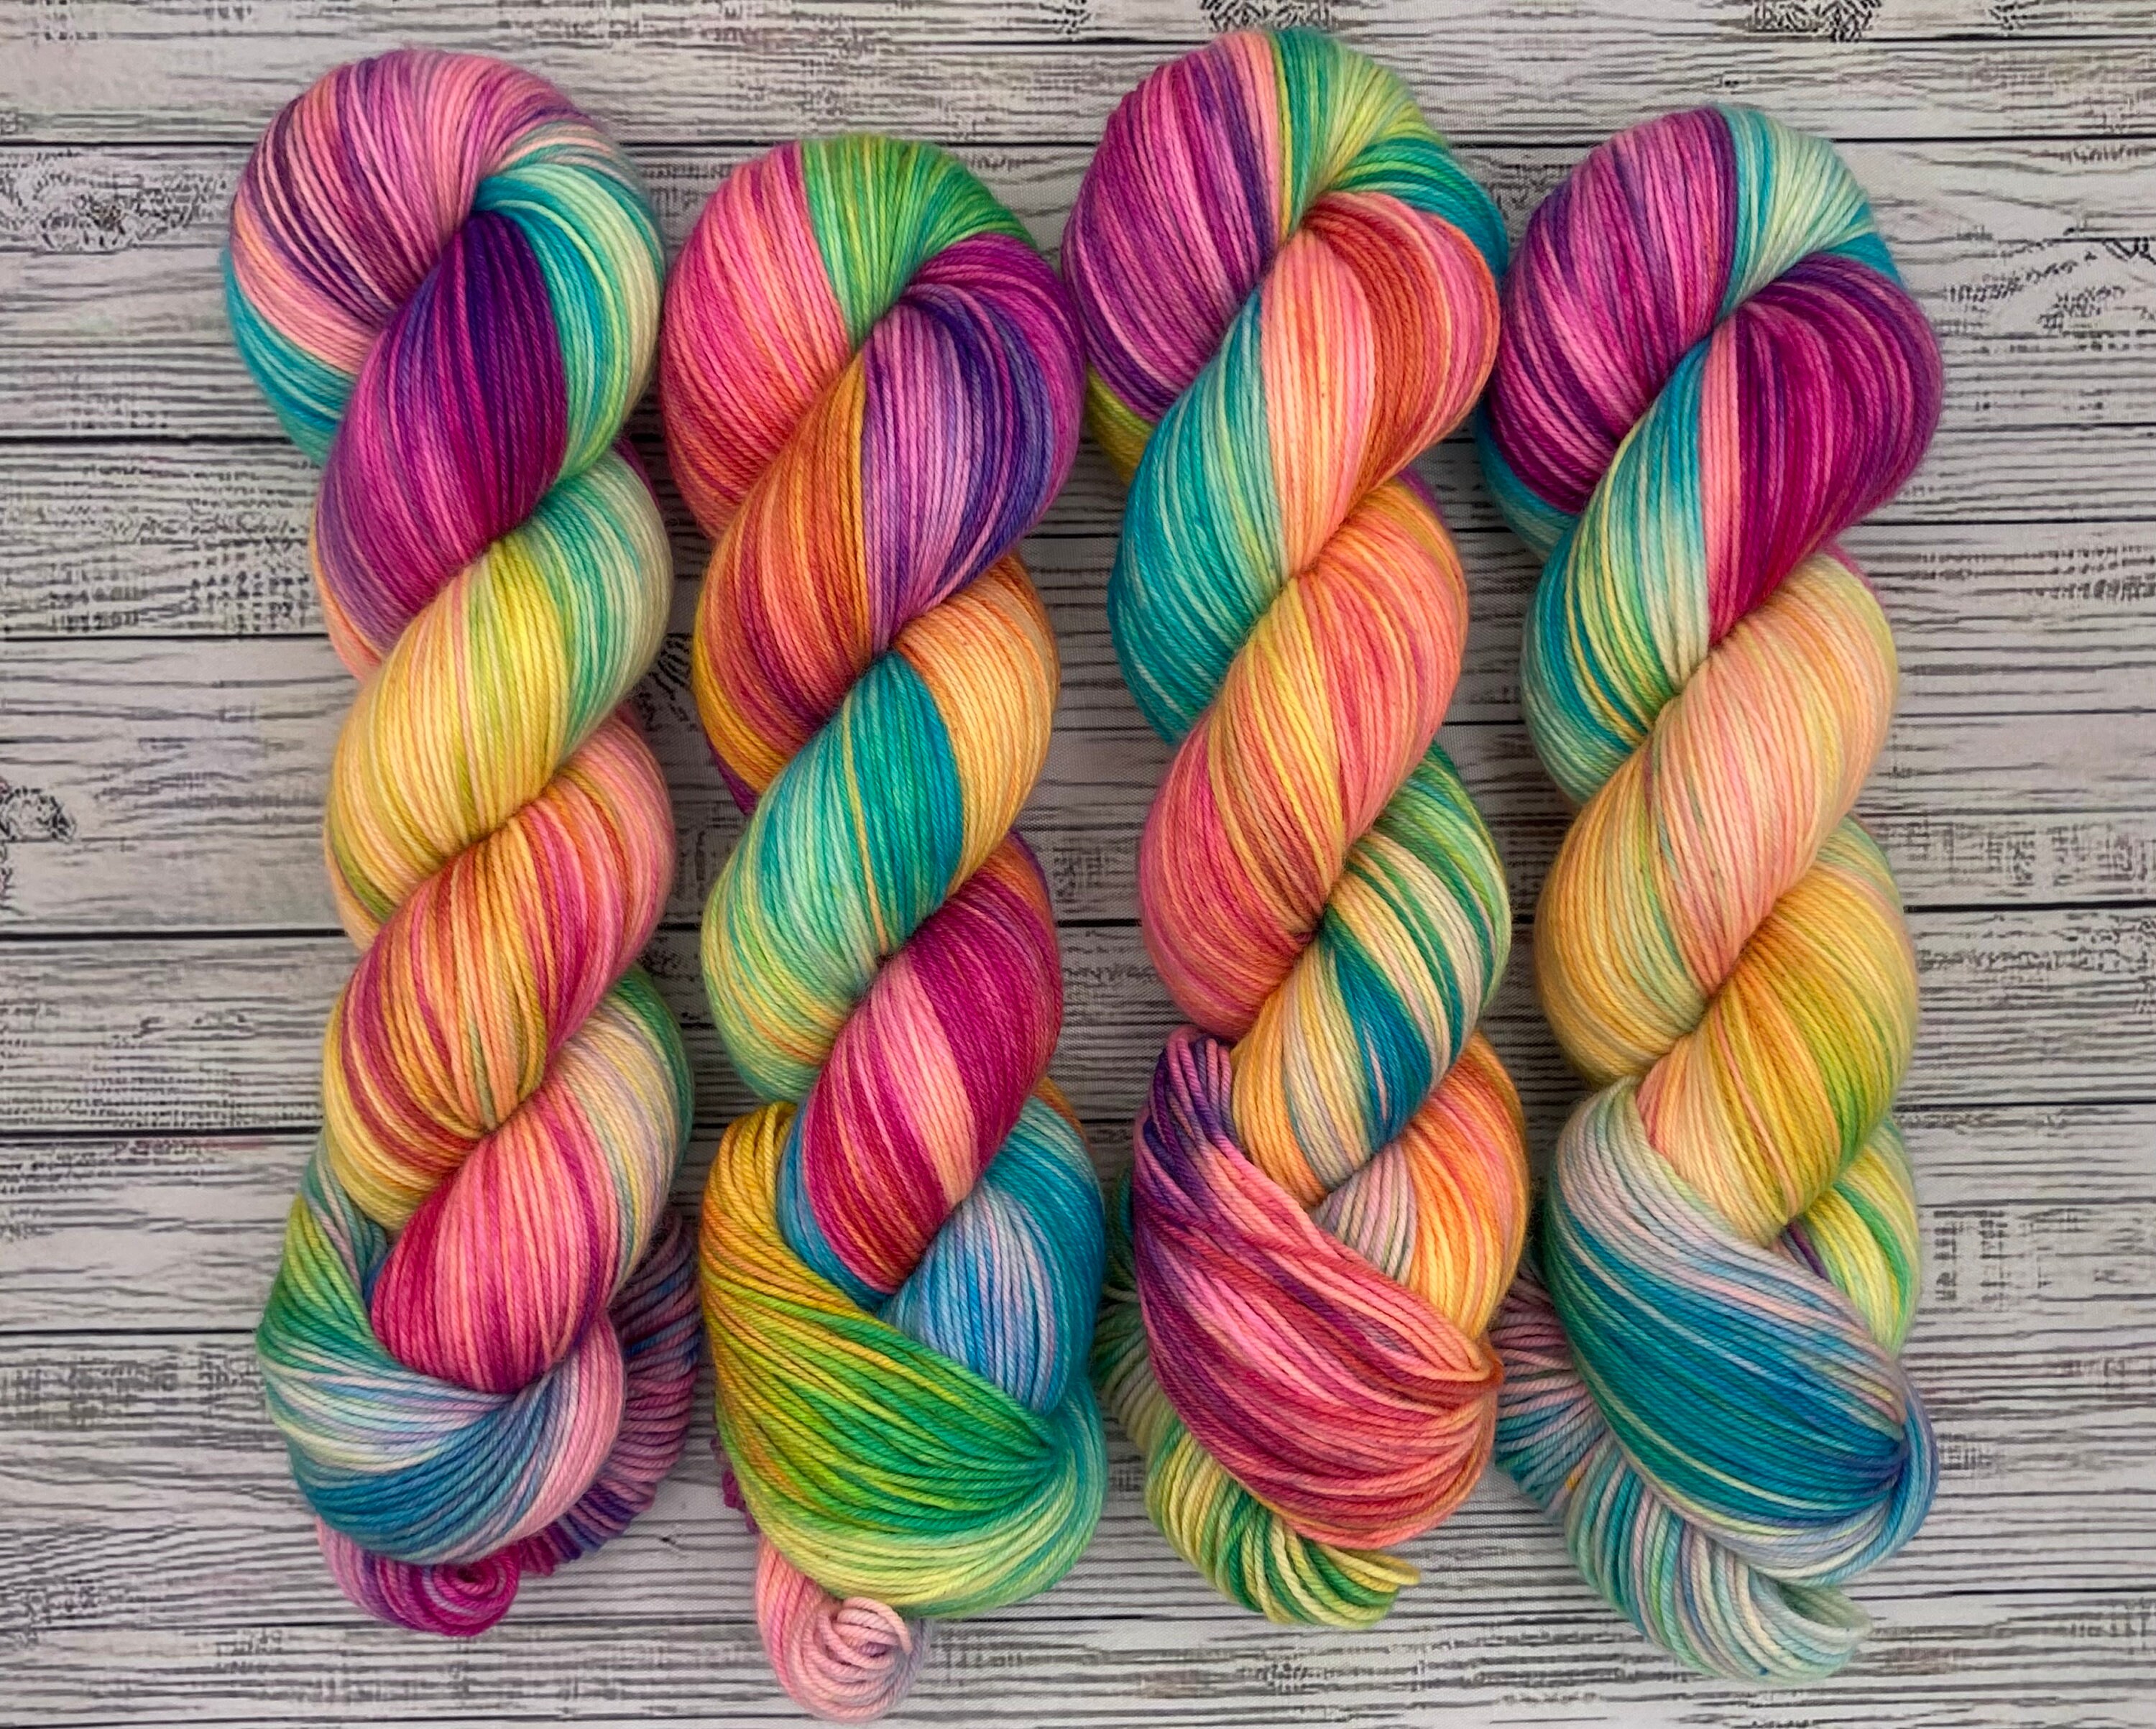 Yarn Hometown USA Lion Brand 6 Diff Key Lime 6 NY Whyte 8 Charlotte Blue 12  Detroit Blue 4 Neon Pink 4 Pittsburg Yellow Acrylic 5 Oz 81 Yds 